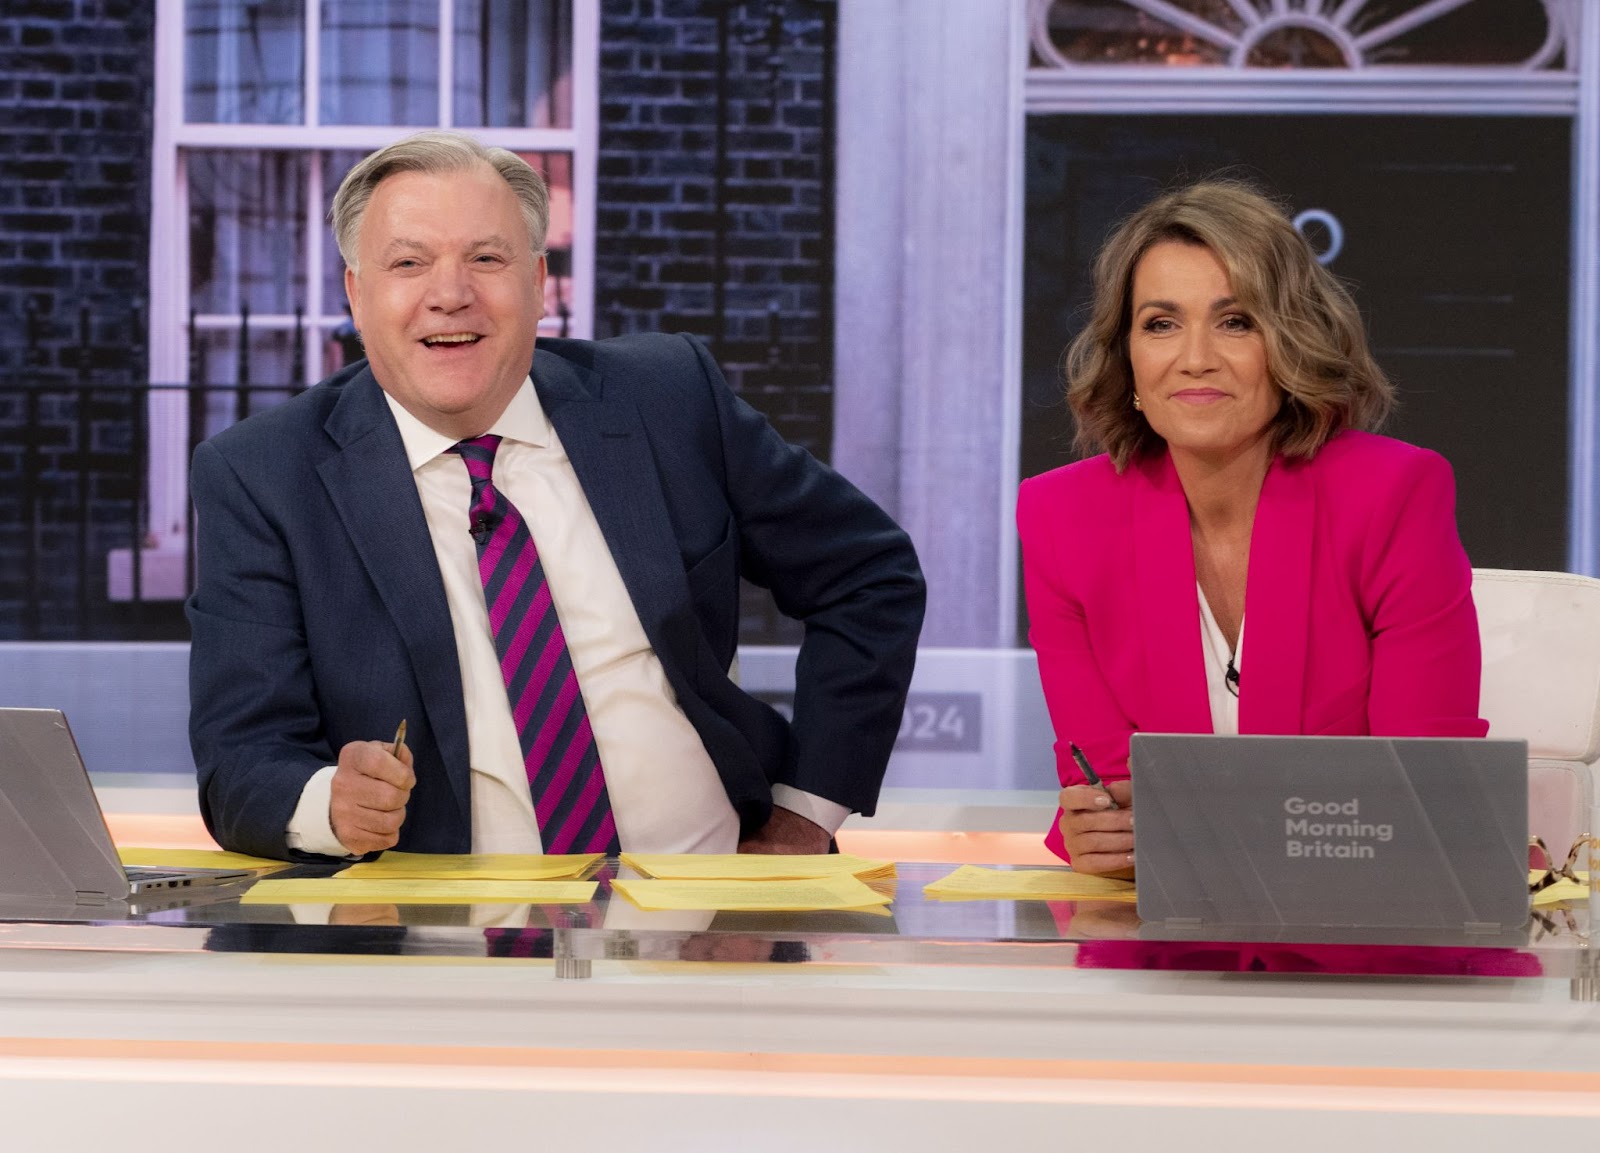 FRIDAY’S GOOD MORNING BRITAIN SEES BIGGEST AUDIENCE FOR THREE YEARS